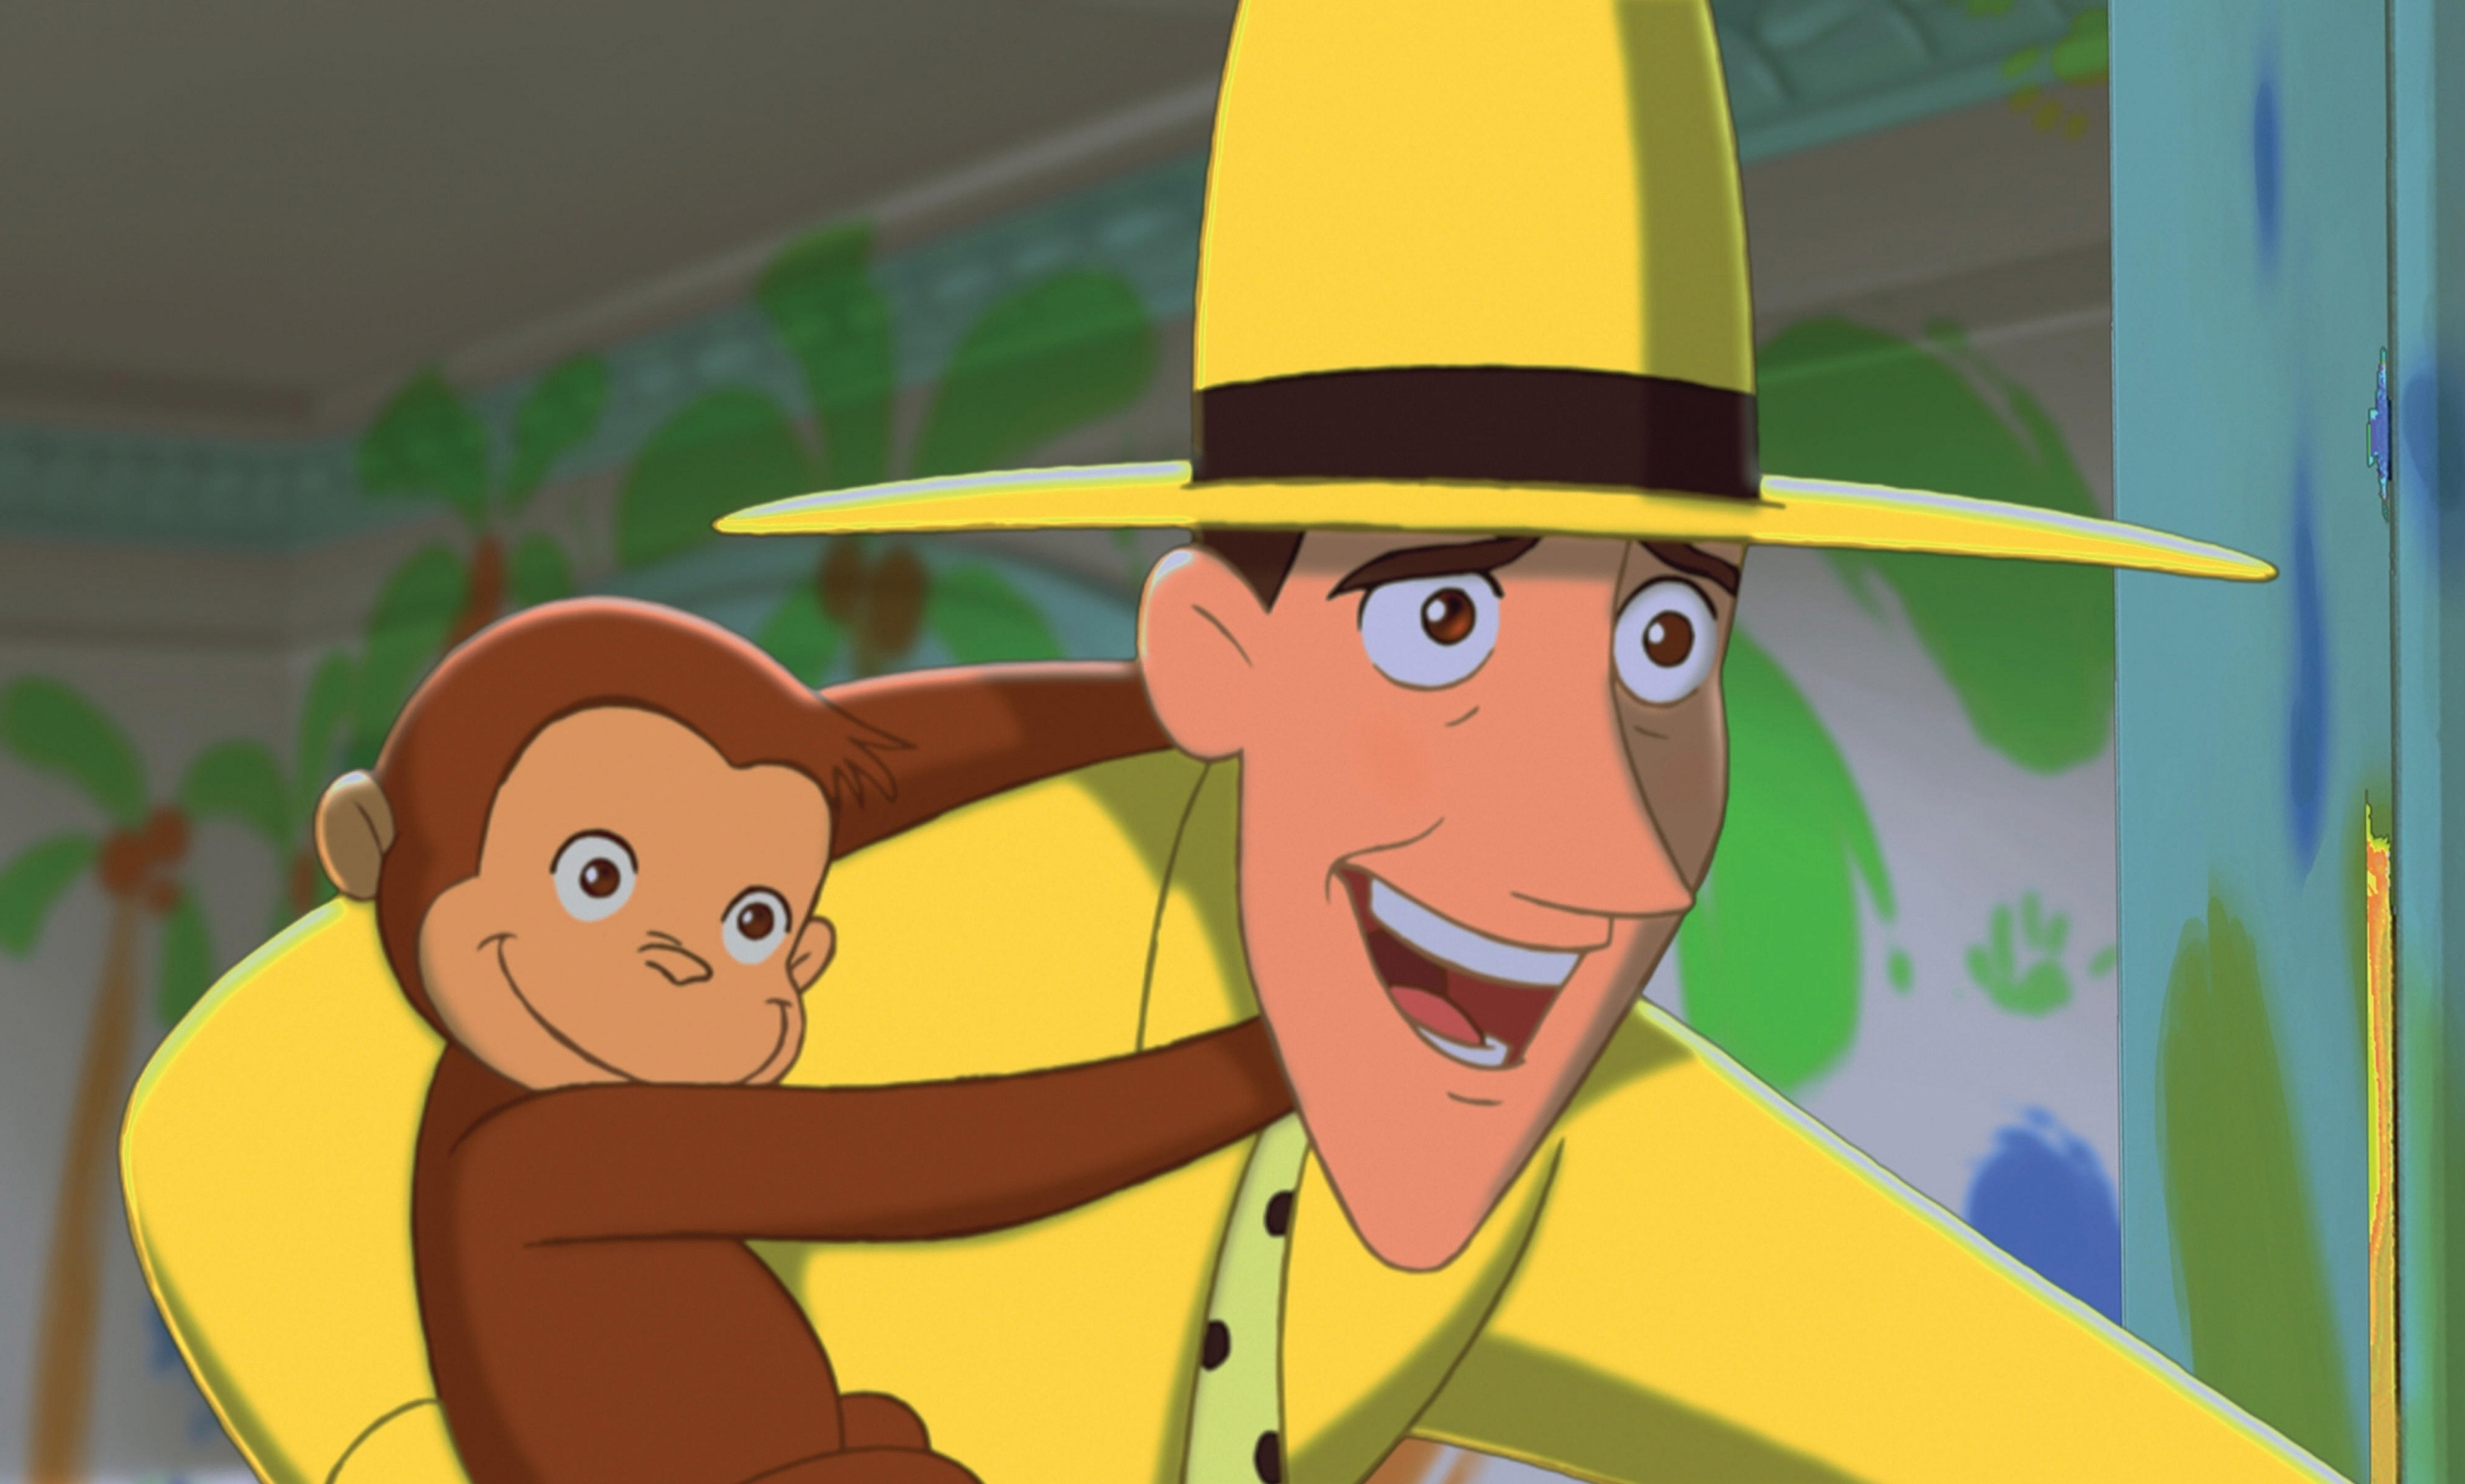 <p>Who doesn't love a well-made, family-friendly cartoon movie? Will Ferrell played the loveable Man with the Yellow Hat in this big-screen adaption of the book "Curious George." The 2006 film was praised by one critic as a "bright, sweet and faithful" adaptation. It grossed $69.8 million on a $50 million budget.</p>